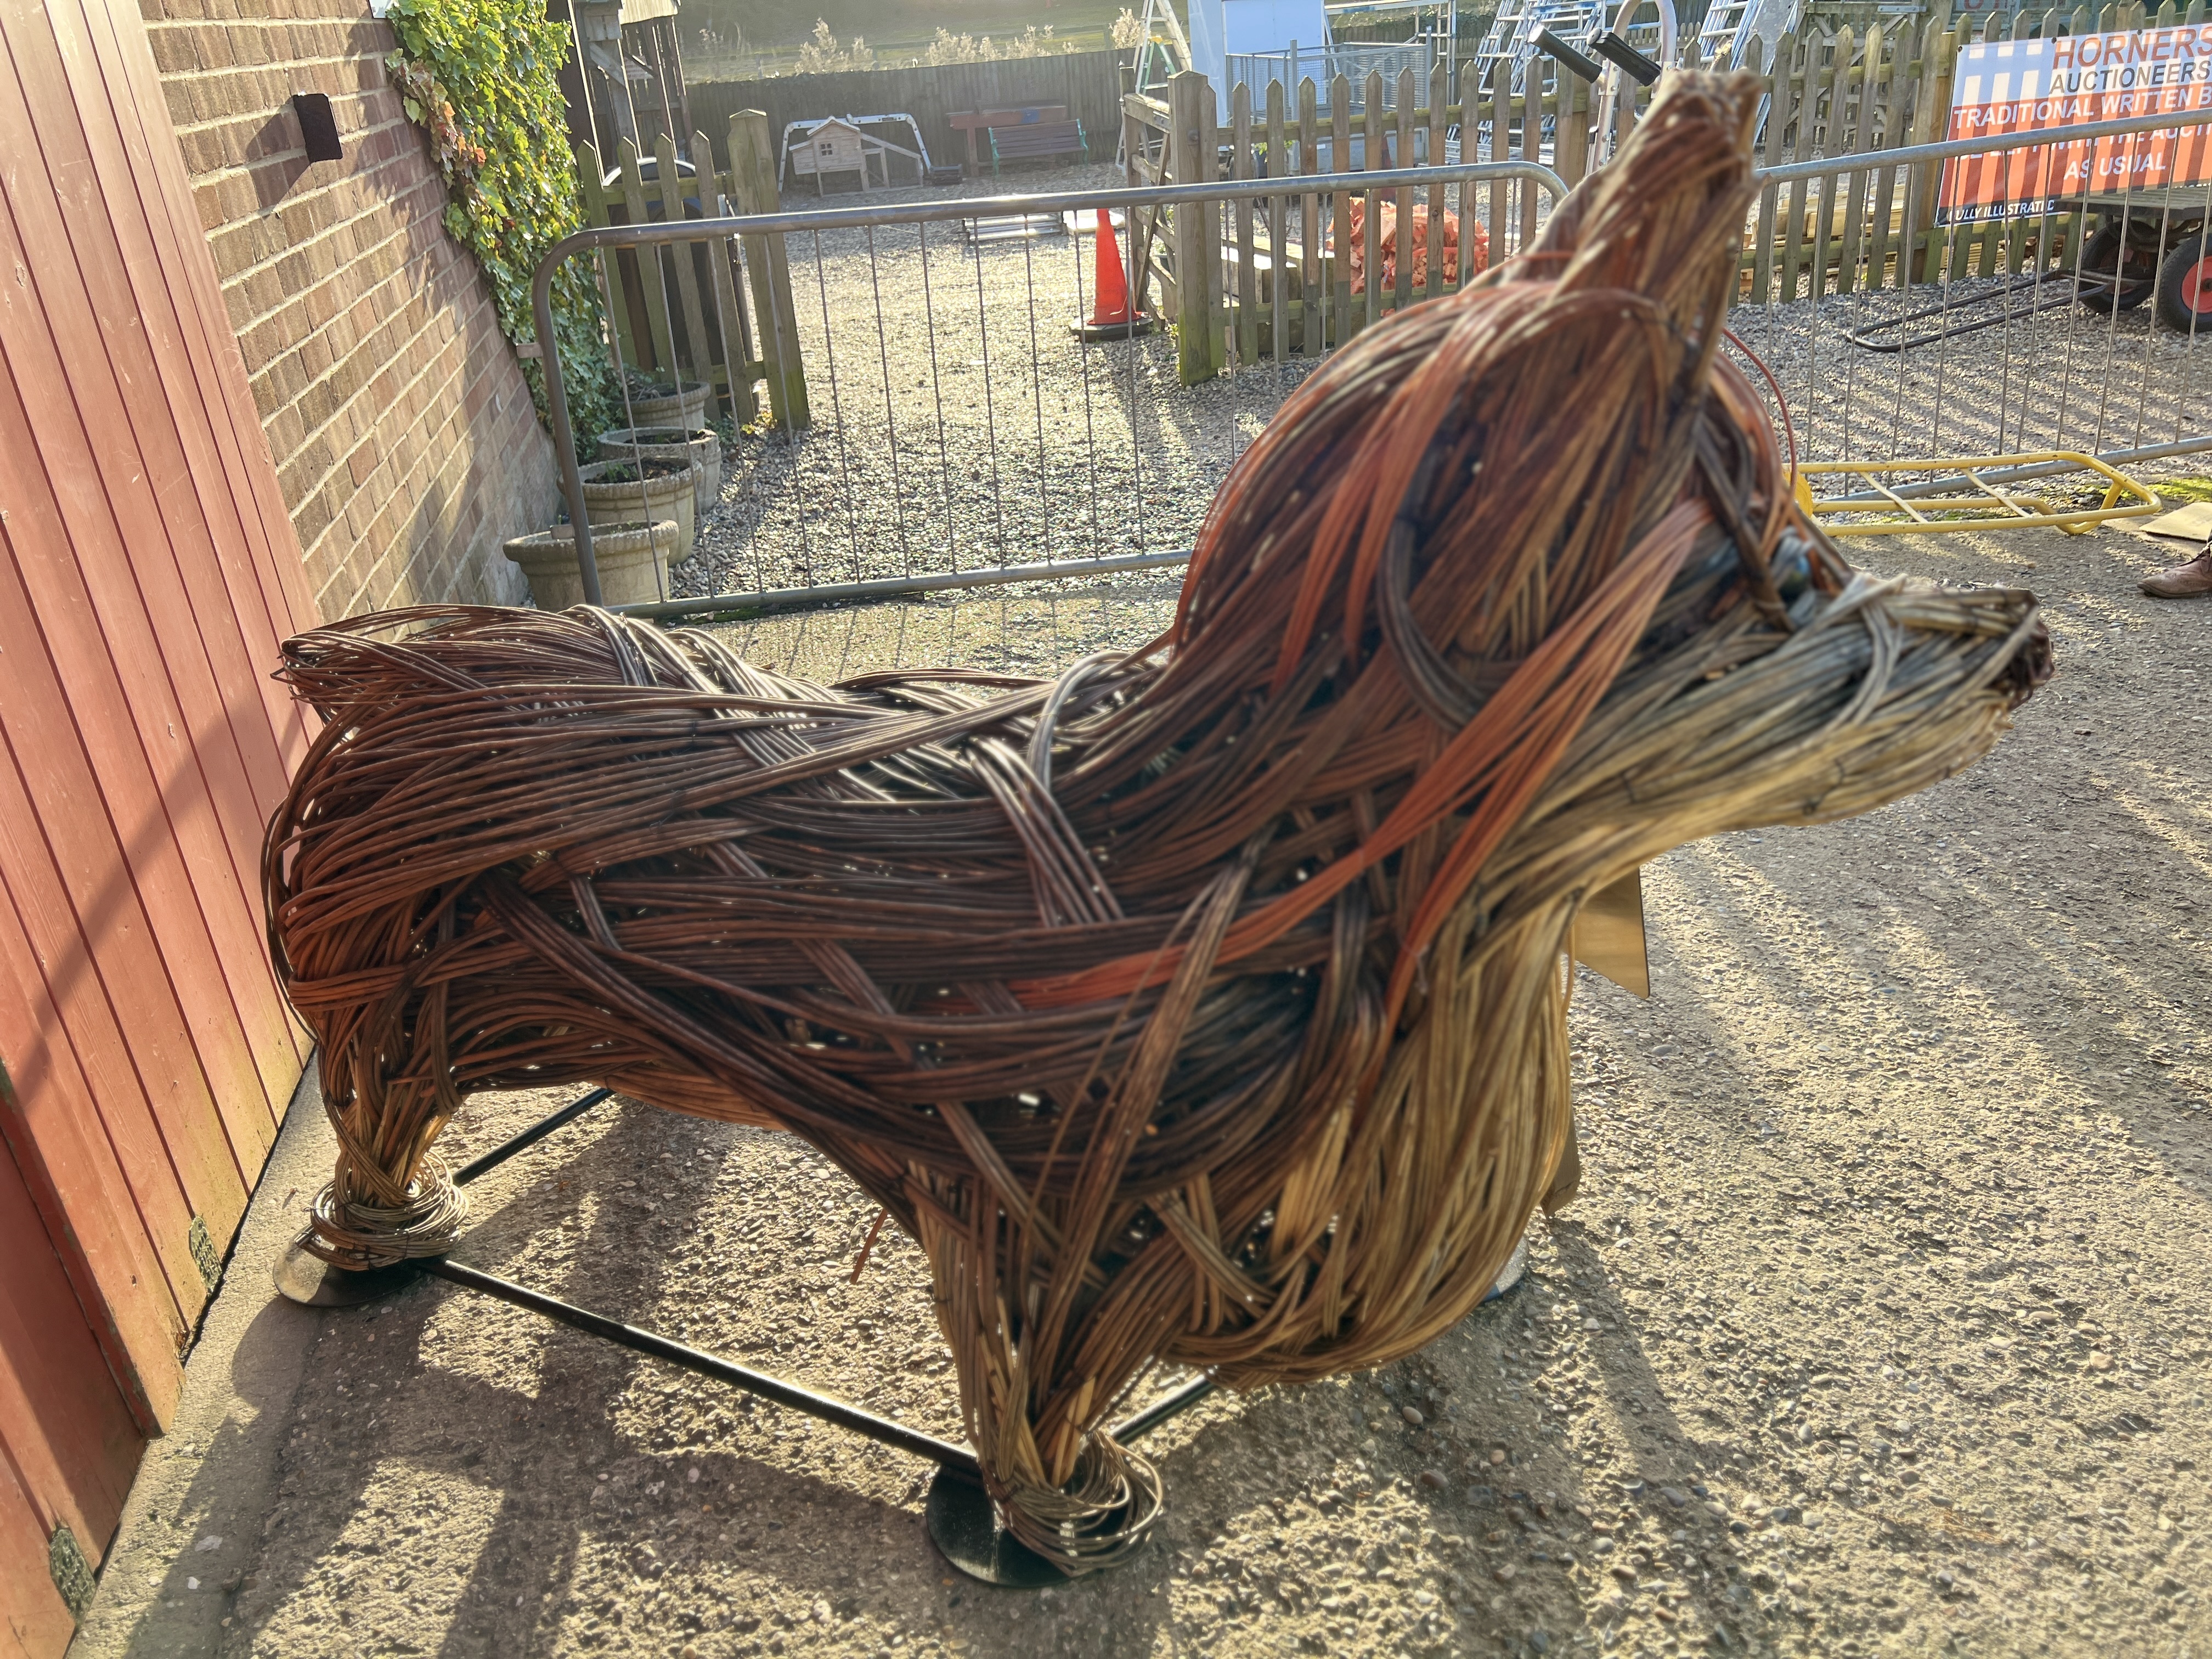 A TIN HOUSE OVERSIZE WILLOW CORGI SCULPTURE BY ALI MACKENZIE "BETTY" No. - Image 7 of 11